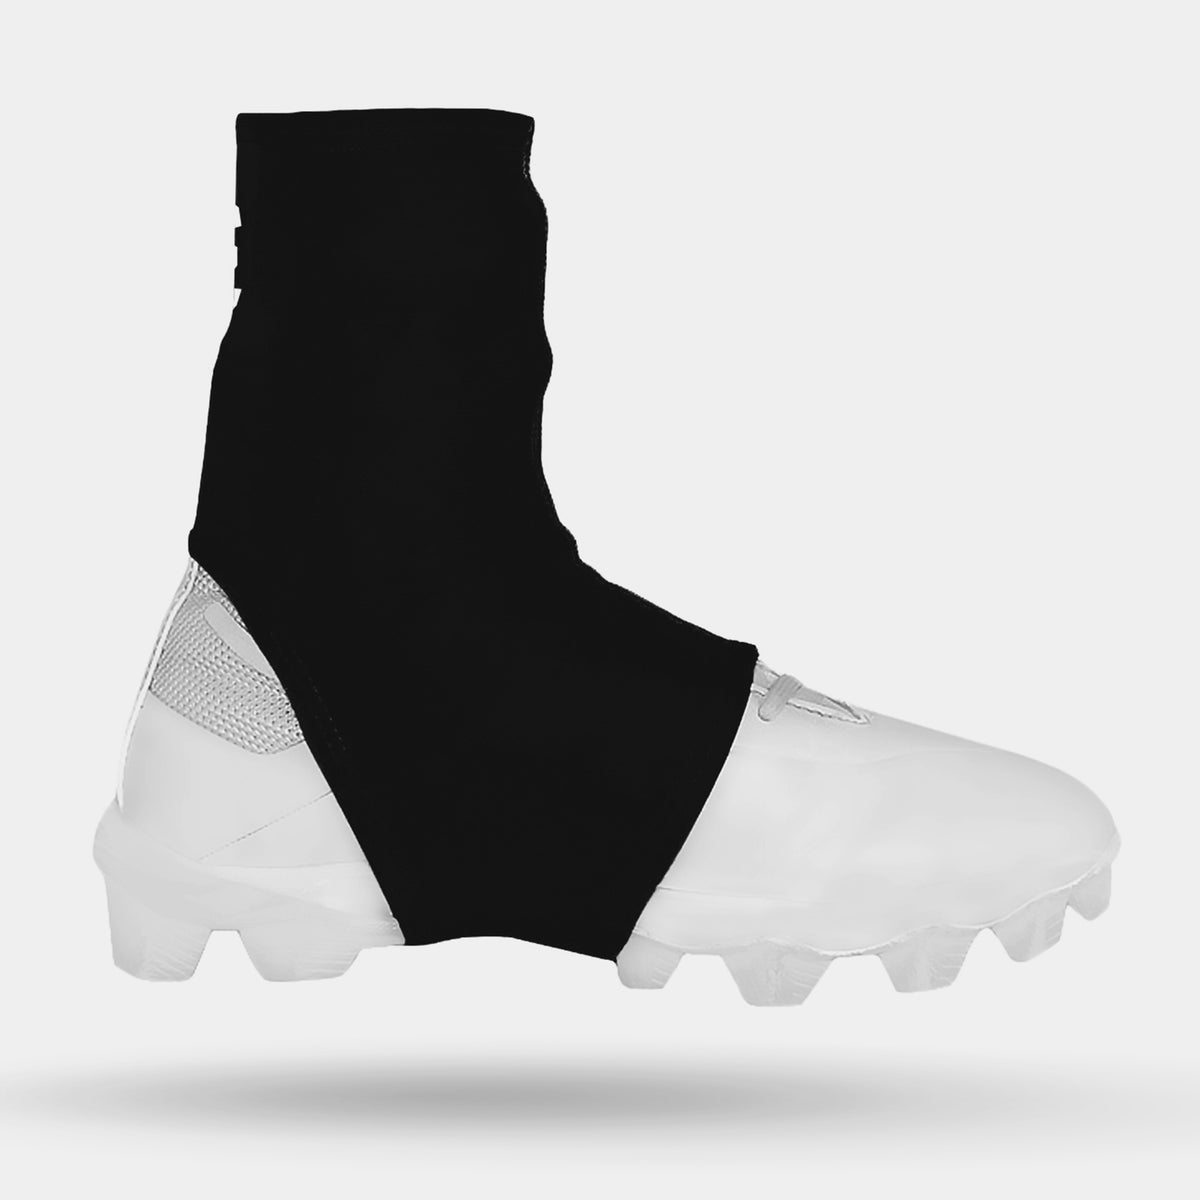 or Turf Premium Wraps for Cleats For Football Field Hockey Soccer TD Spats Football Cleat Covers